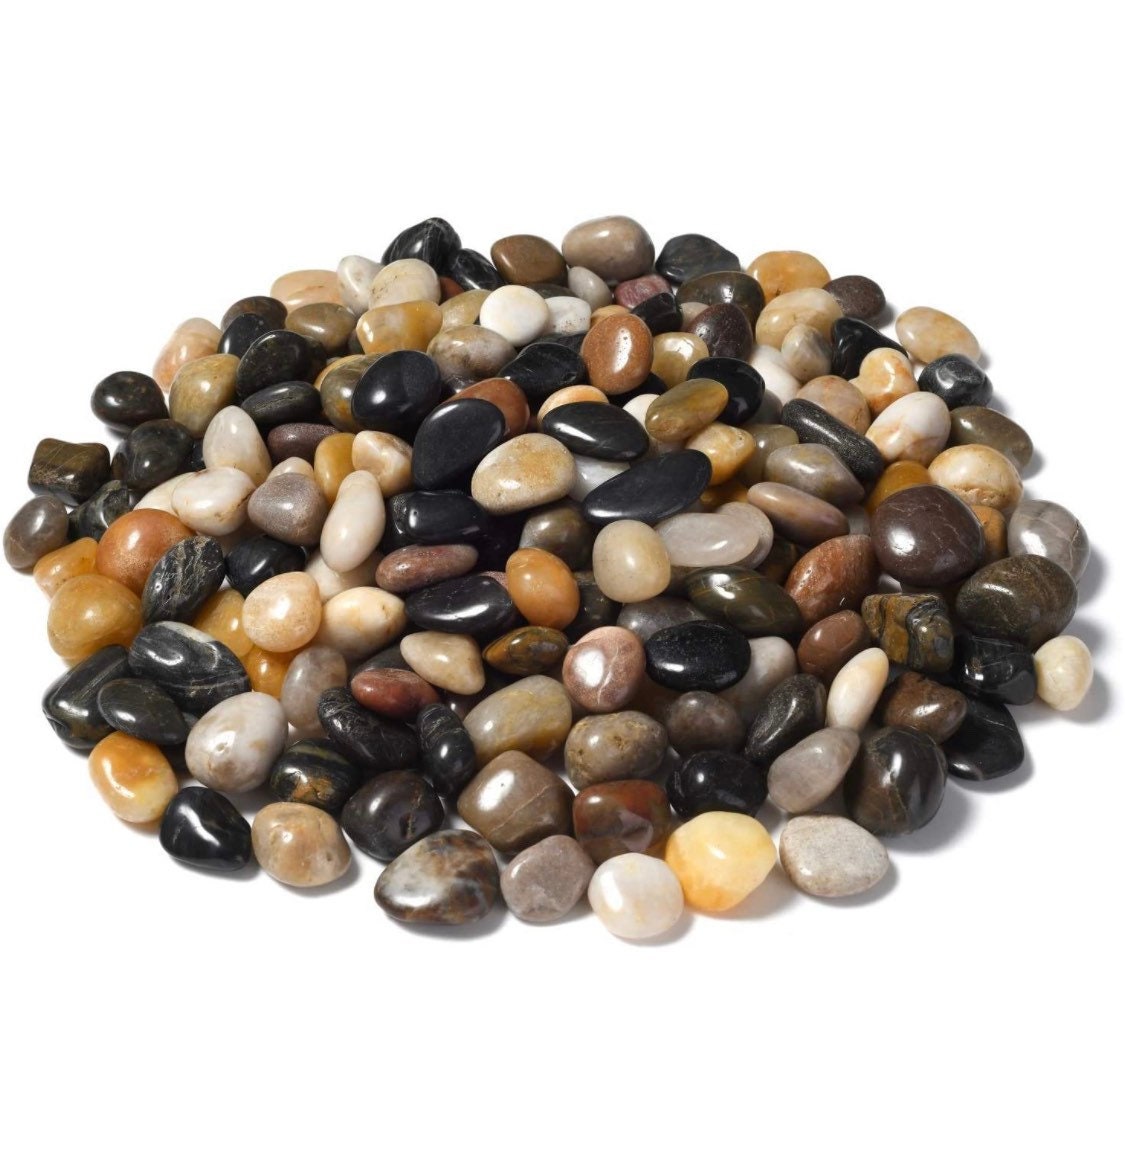 Pebbles Garden Stones 1lb Smooth Polished River Stones for Crafts, Plants,  and Tanks 